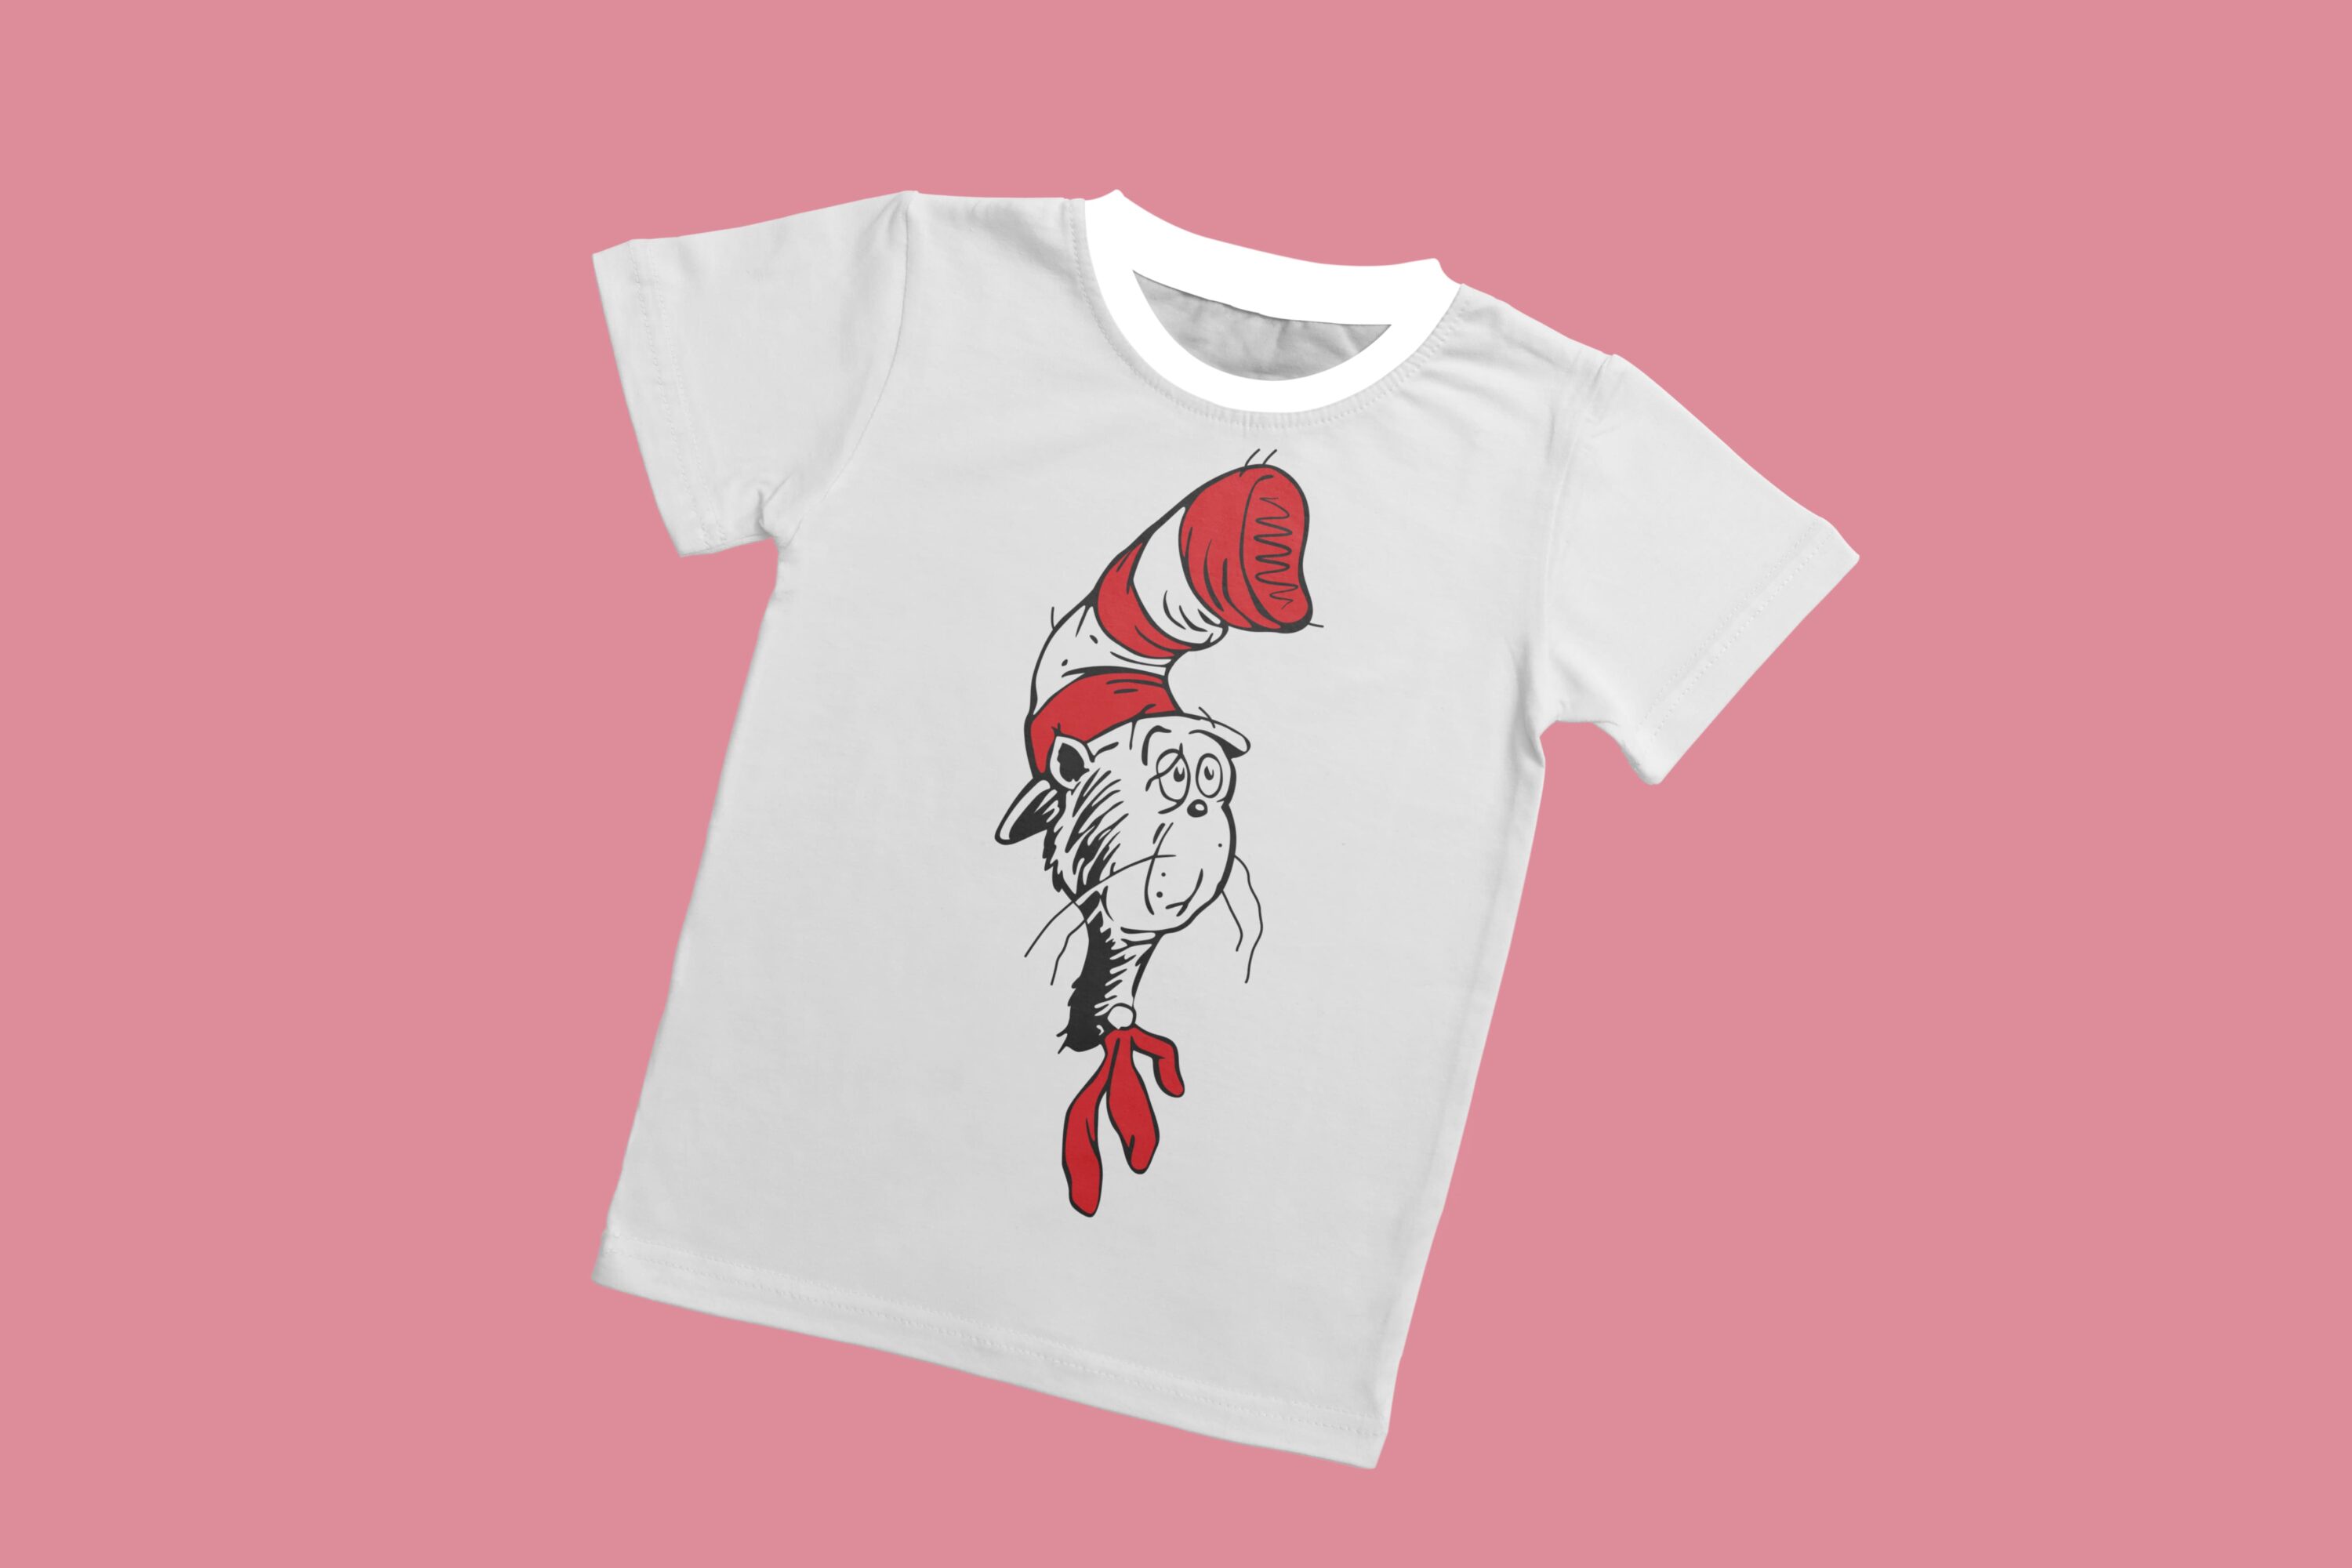 A gray t-shirt with a white collar and the face of a sad cat with a red bow in a red and white hat.